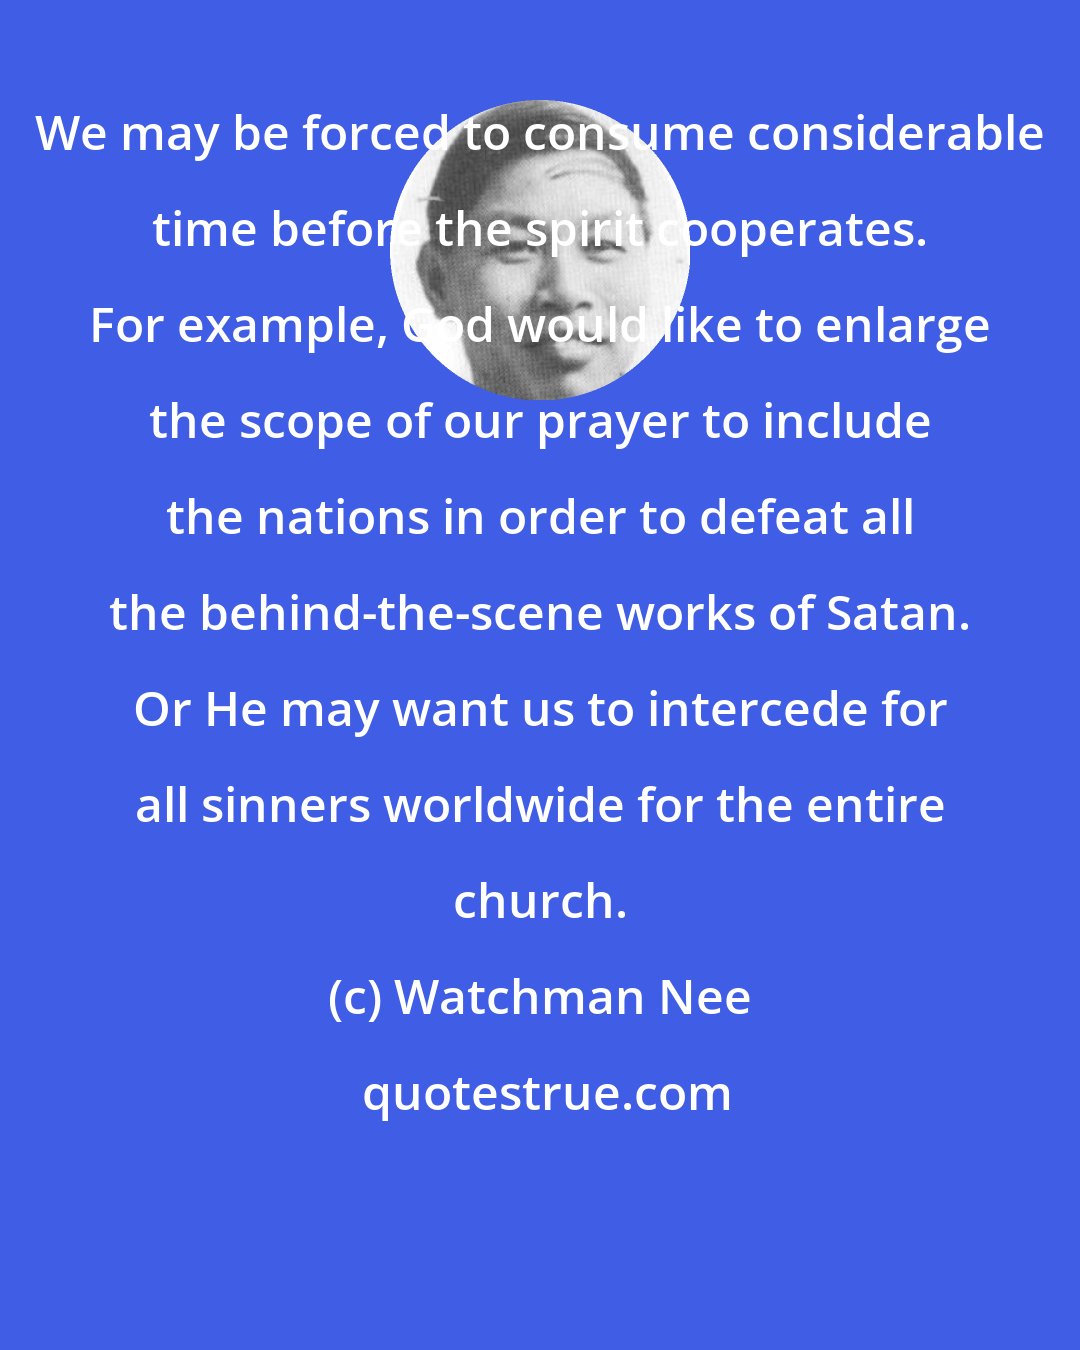 Watchman Nee: We may be forced to consume considerable time before the spirit cooperates. For example, God would like to enlarge the scope of our prayer to include the nations in order to defeat all the behind-the-scene works of Satan. Or He may want us to intercede for all sinners worldwide for the entire church.